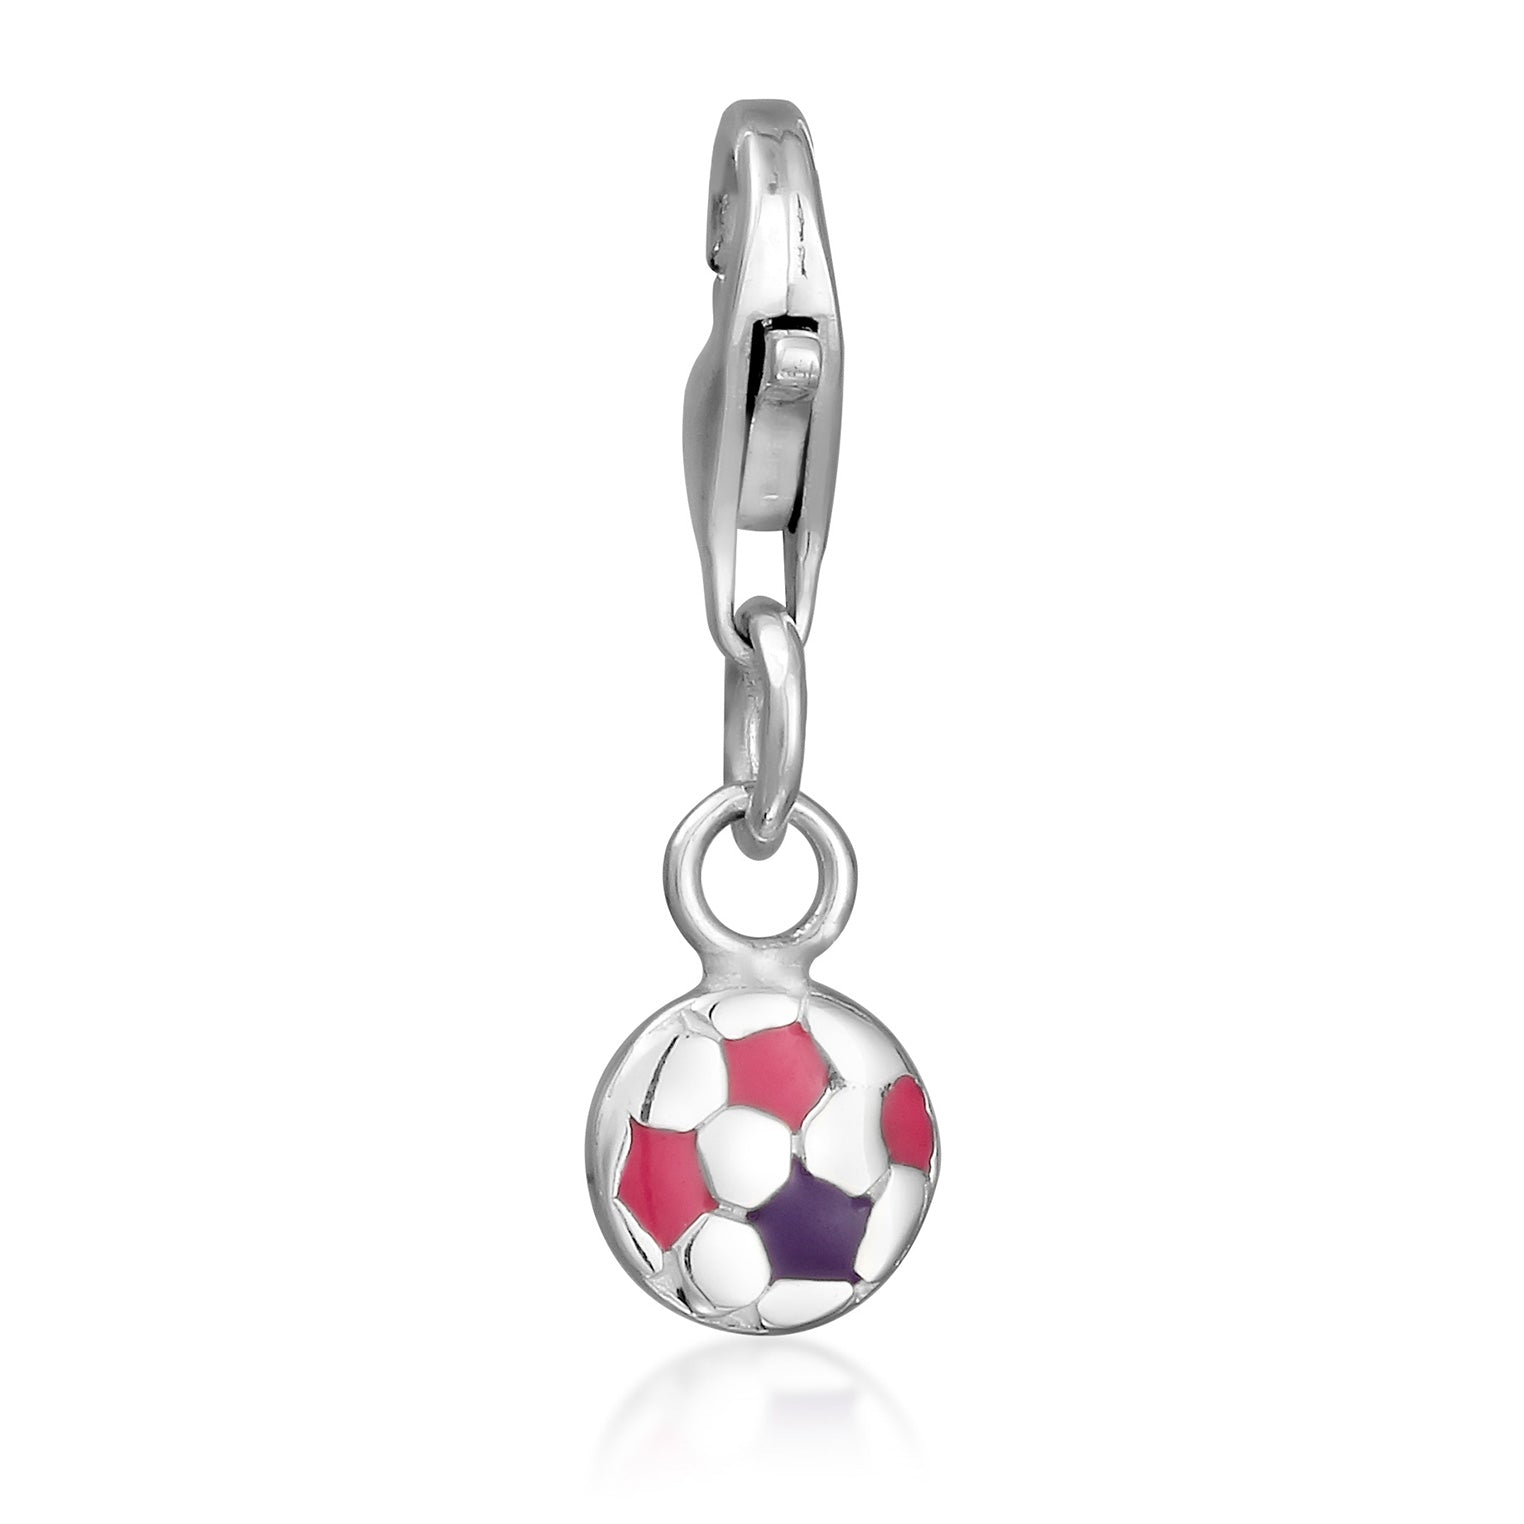 Pink - Nenalina | Charm Fußball | Emaille (Rosa) | 925 Sterling Silber